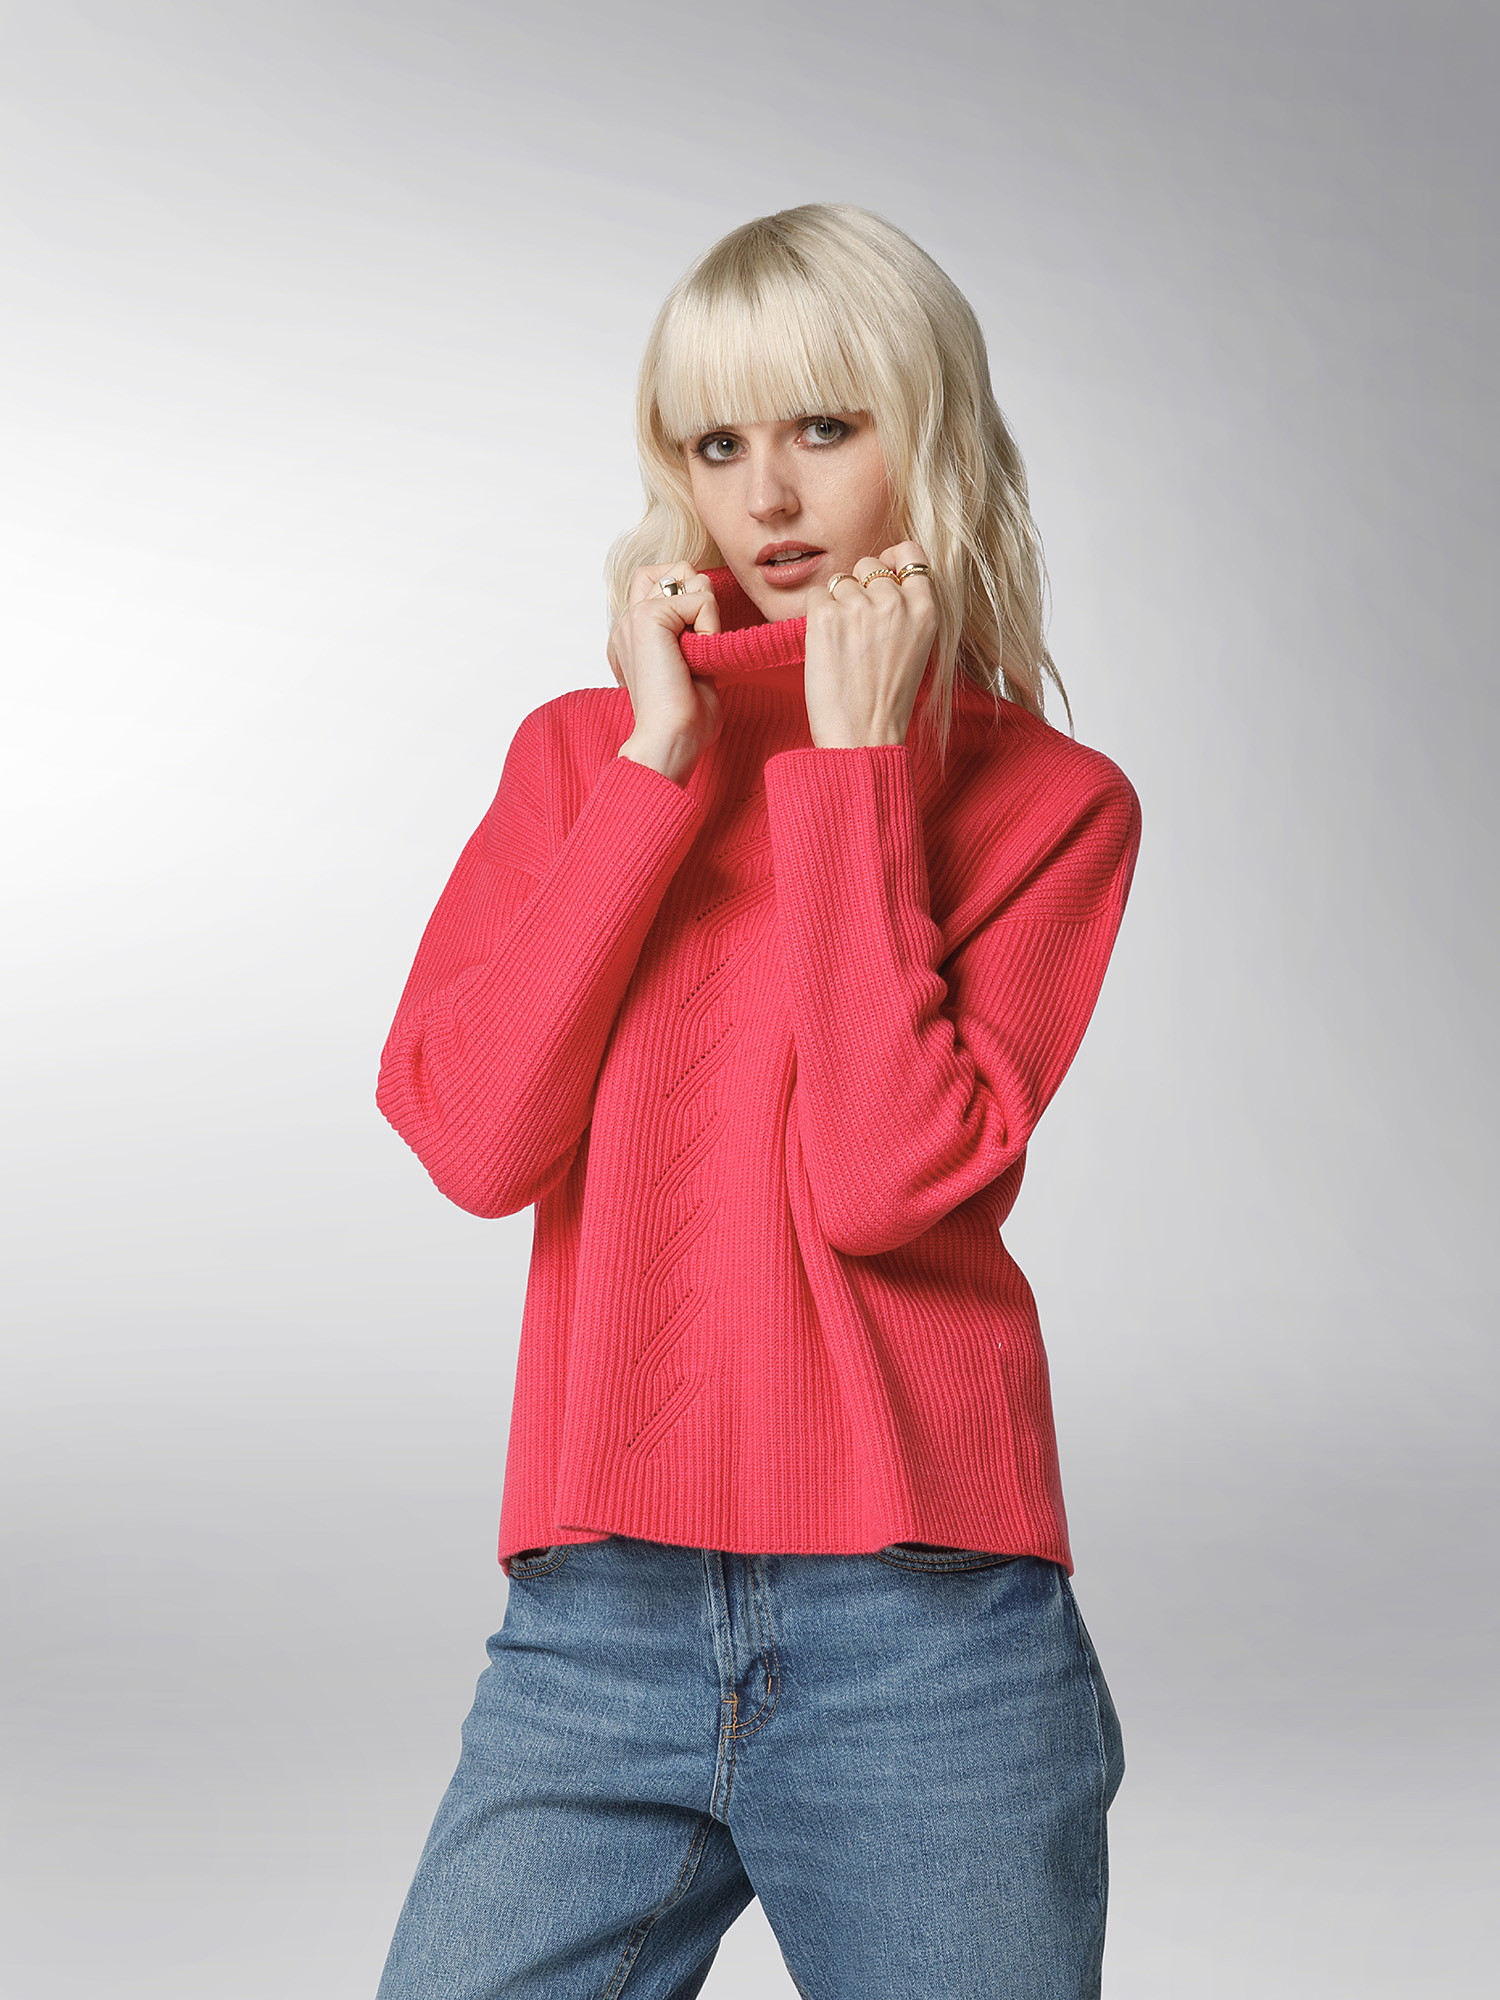 K Collection - Pullover dolcevita in lana extrafine, Rosa fuxia, large image number 3